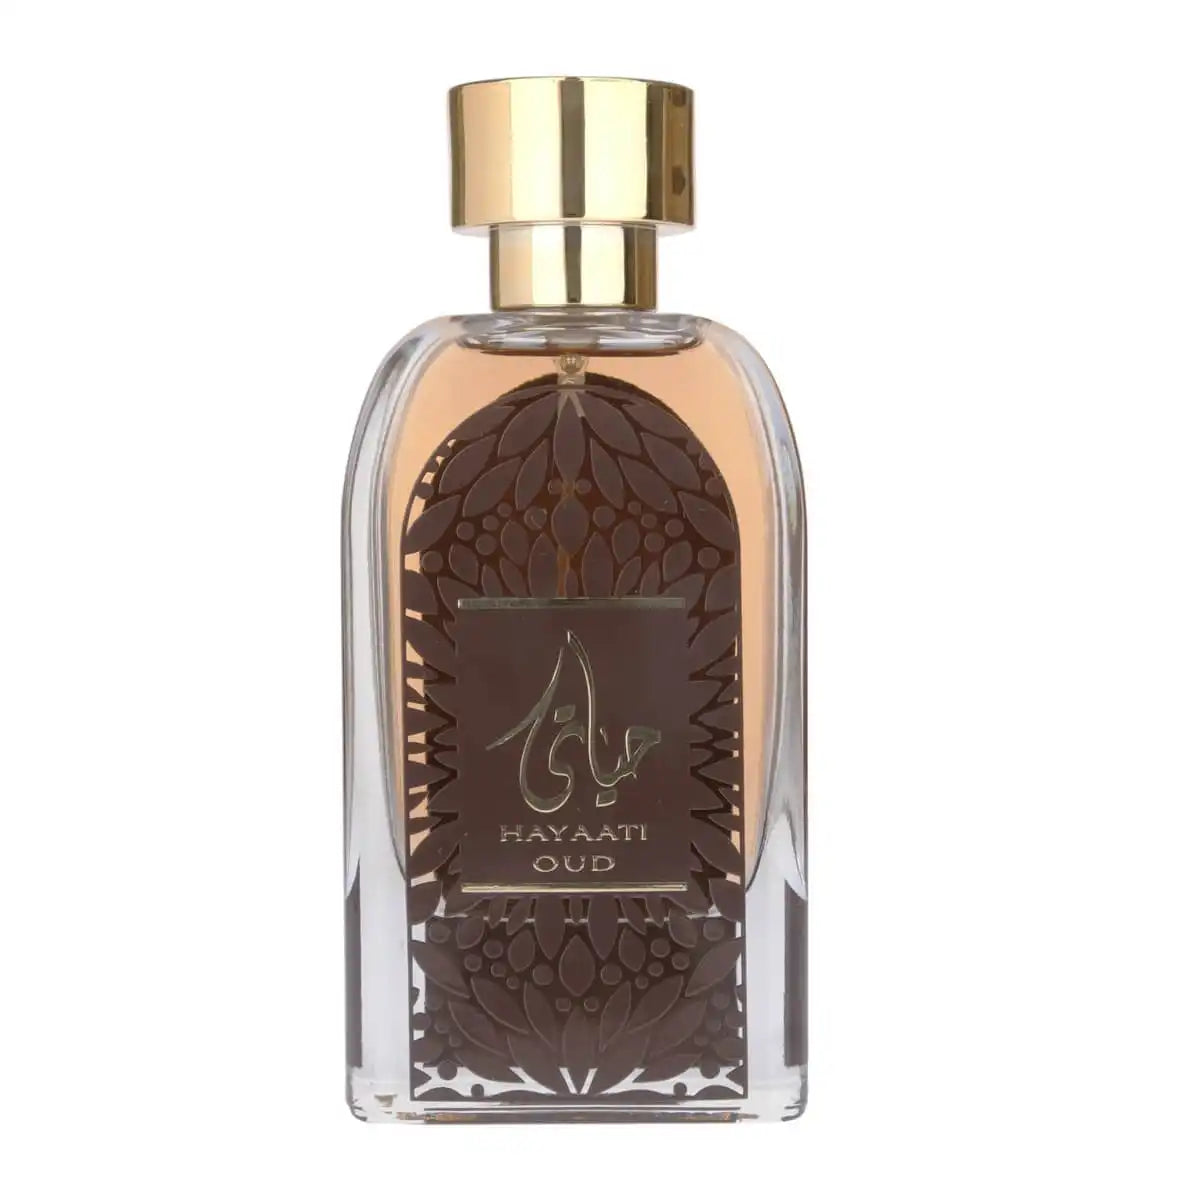 The image shows a clear glass perfume bottle with a golden cap. The perfume liquid is a dark amber color. The front of the bottle features a decorative motif resembling a dome with geometric patterns in brown and a central label with the name "HAYAATI OUD" in gold lettering and elegant Arabic calligraphy. The overall design suggests an opulent and exotic fragrance, and the bottle is set against a plain white background to emphasize its design and contents.